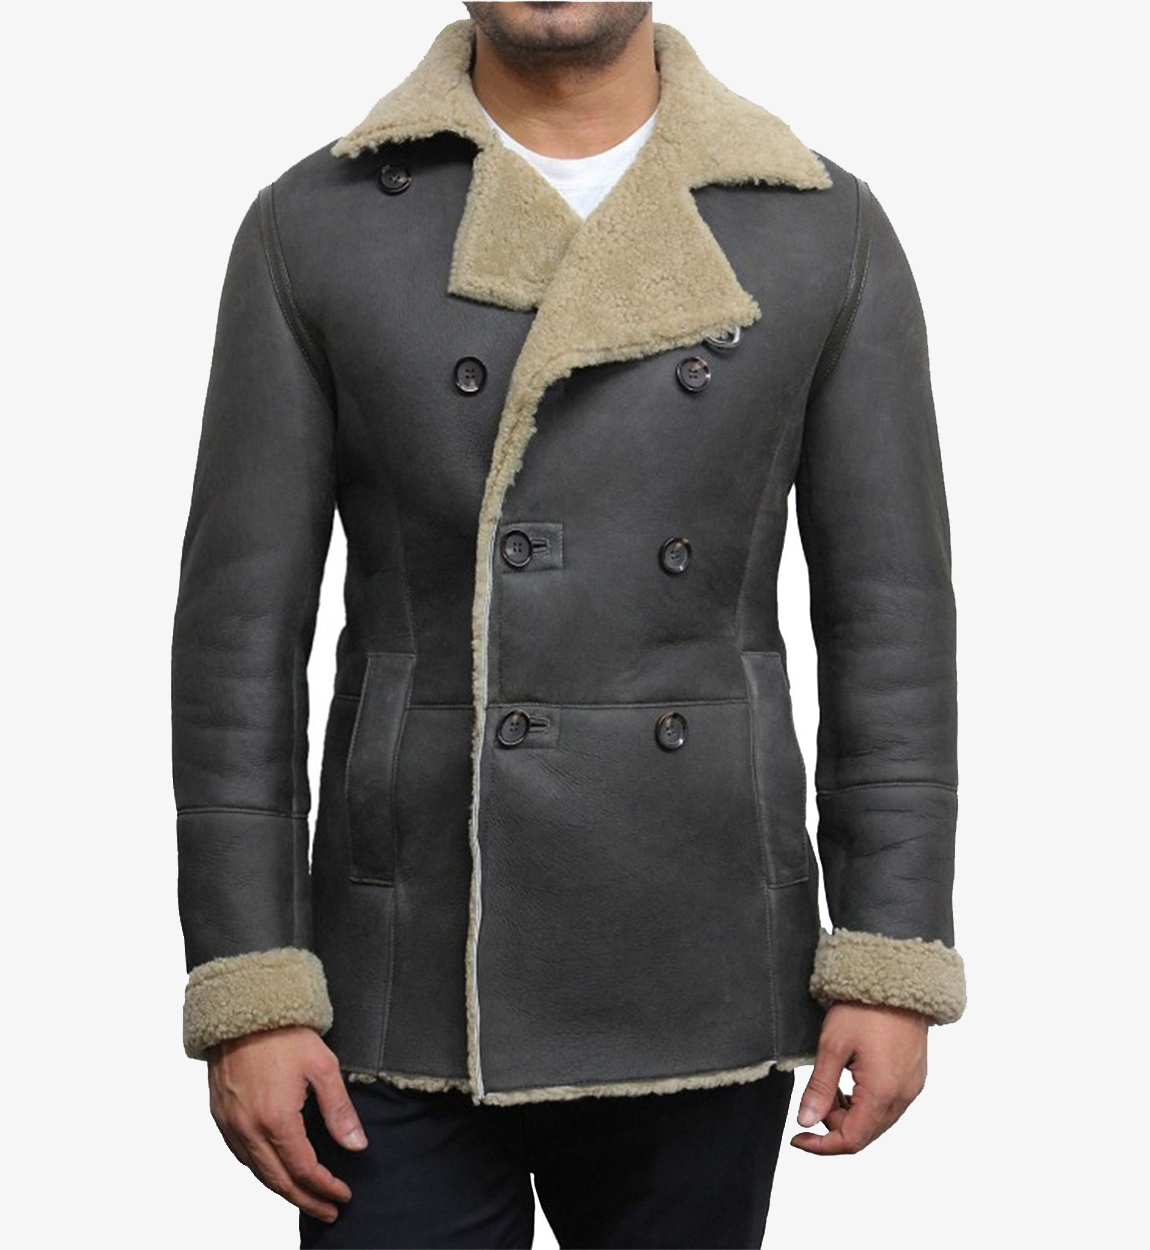 Double Breasted Men's Grey Leather Peacoat